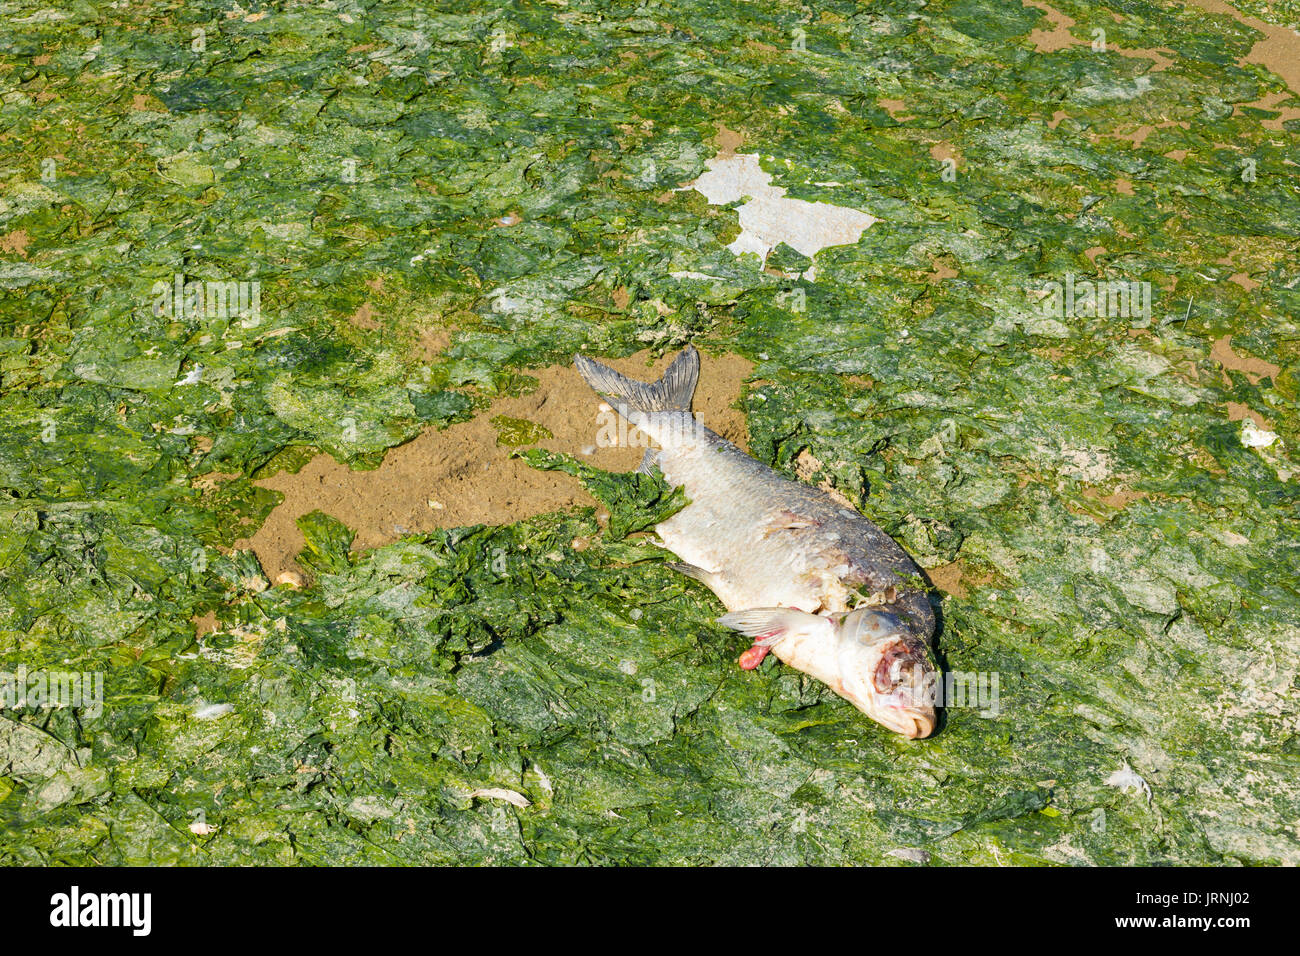 Dead fish on seaweed on beach at low tide, North Sea coast, Netherlands Stock Photo